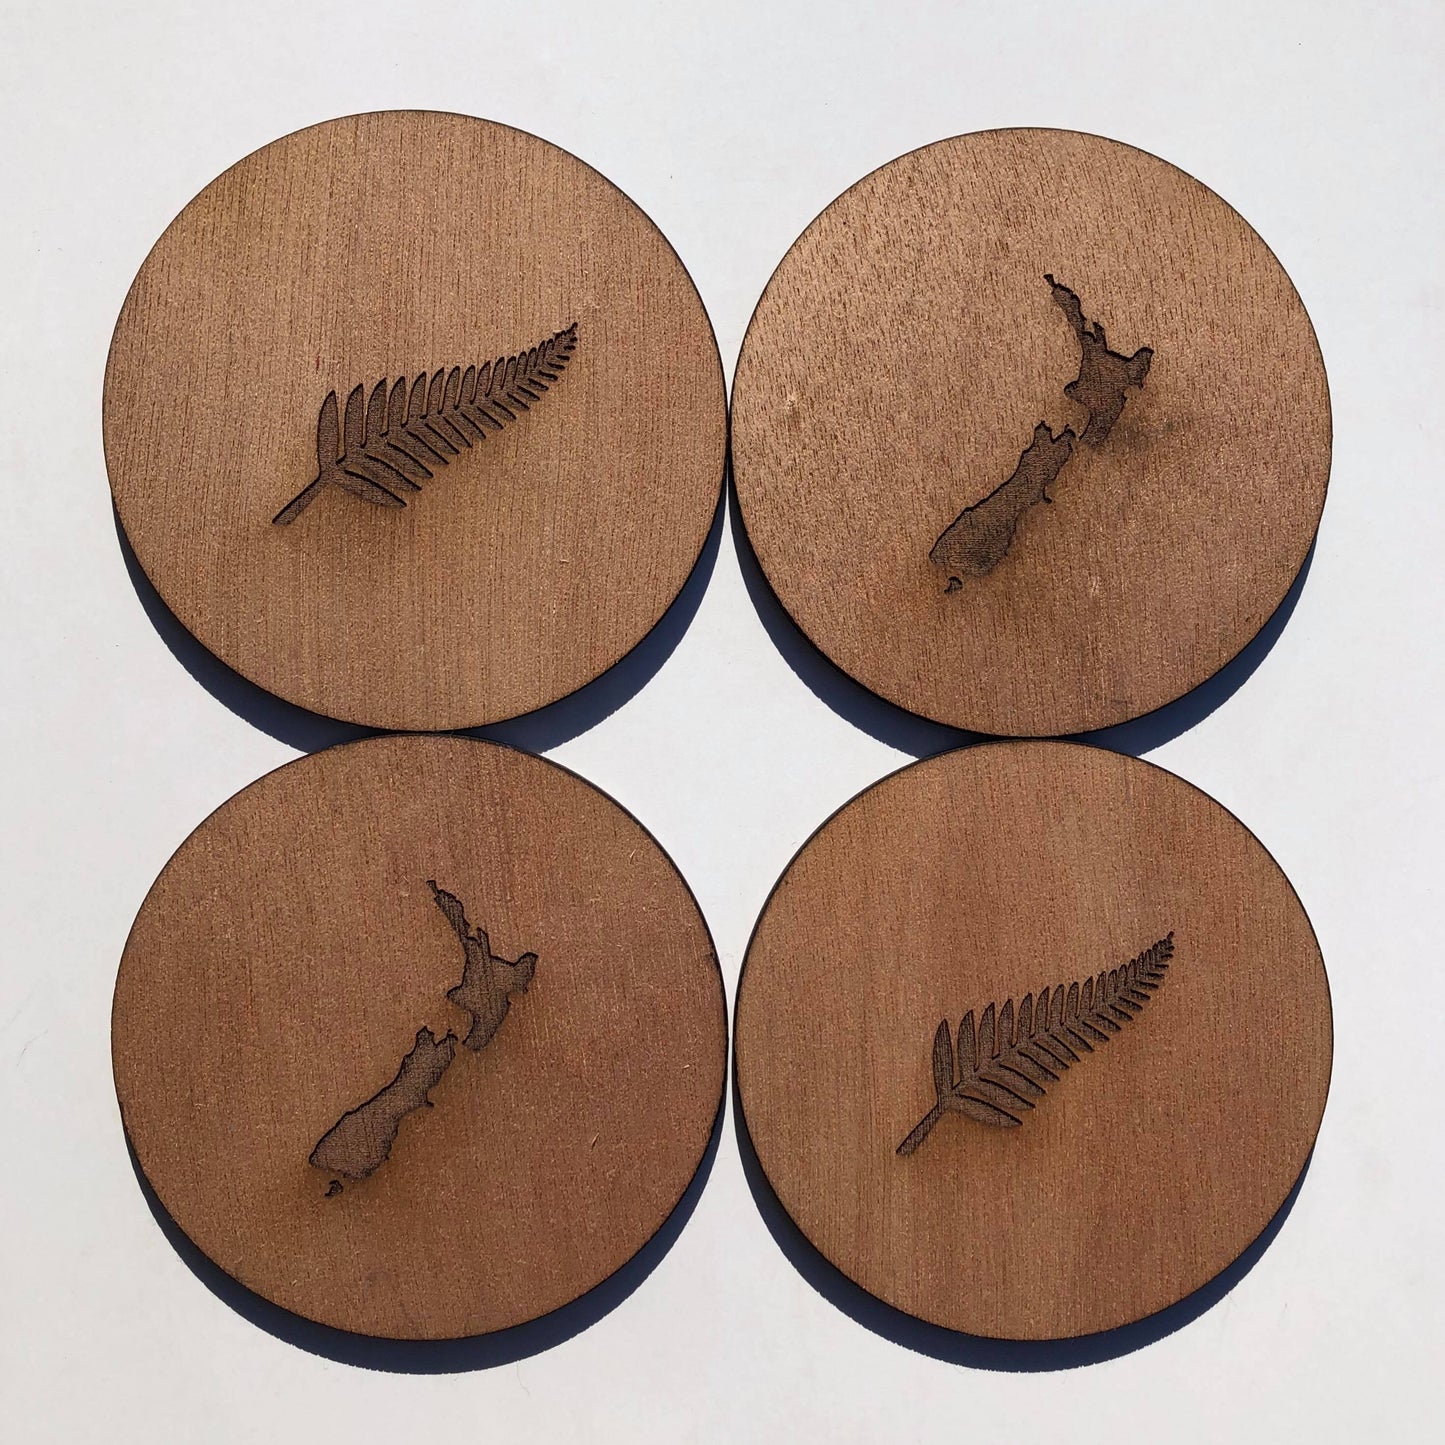 New Zealand Fern coasters - Younique Collective